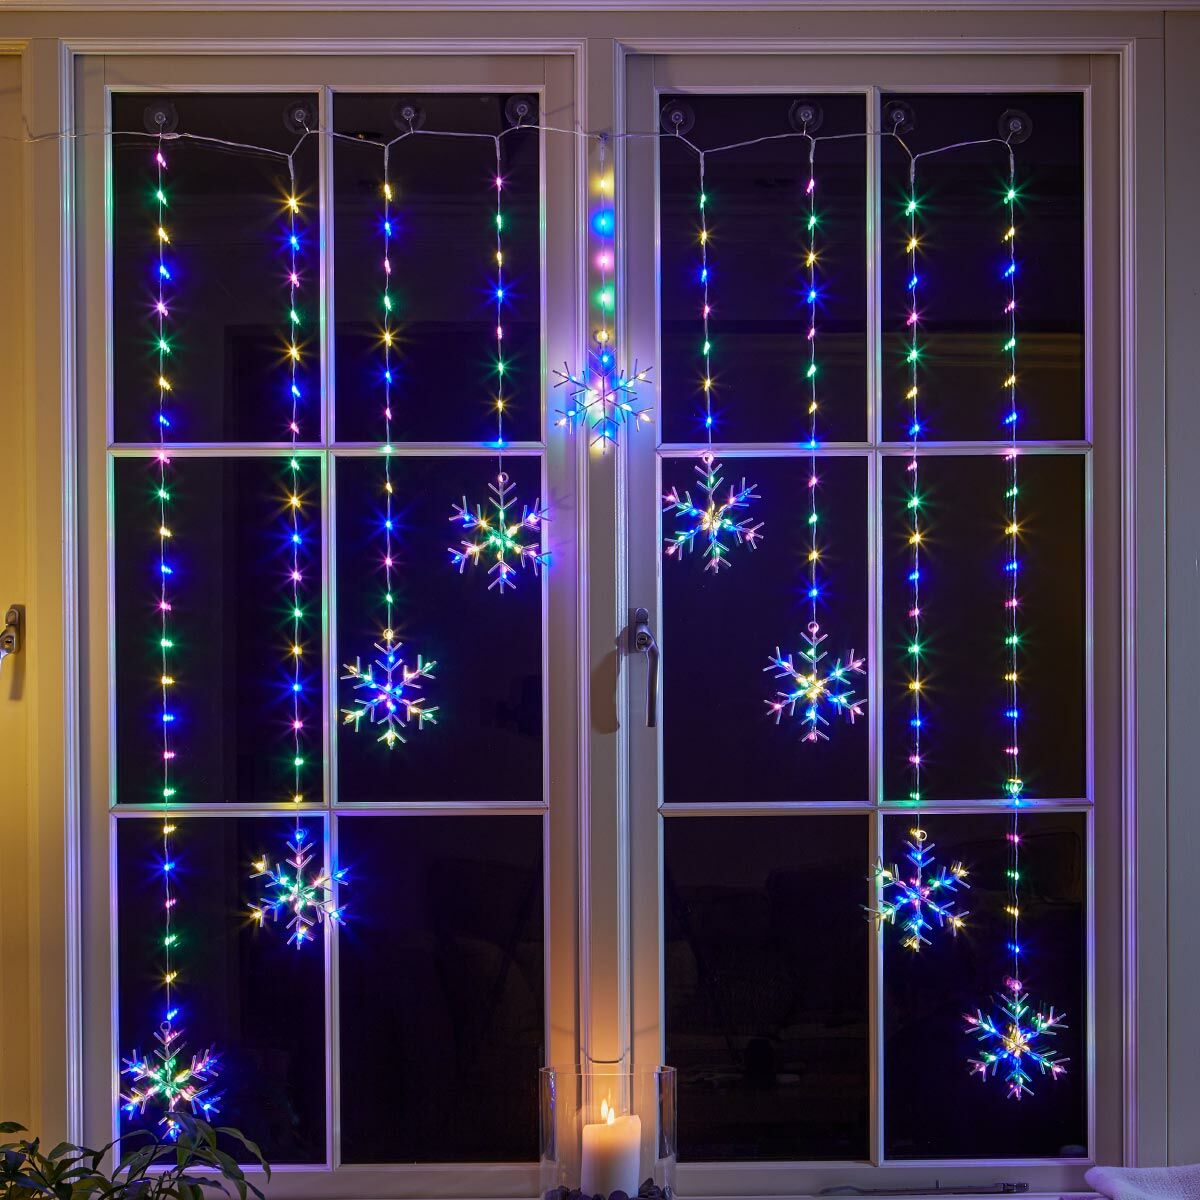 1.2m  x 1.2m Firefly Wire Snowflake Curtain Lights image 1